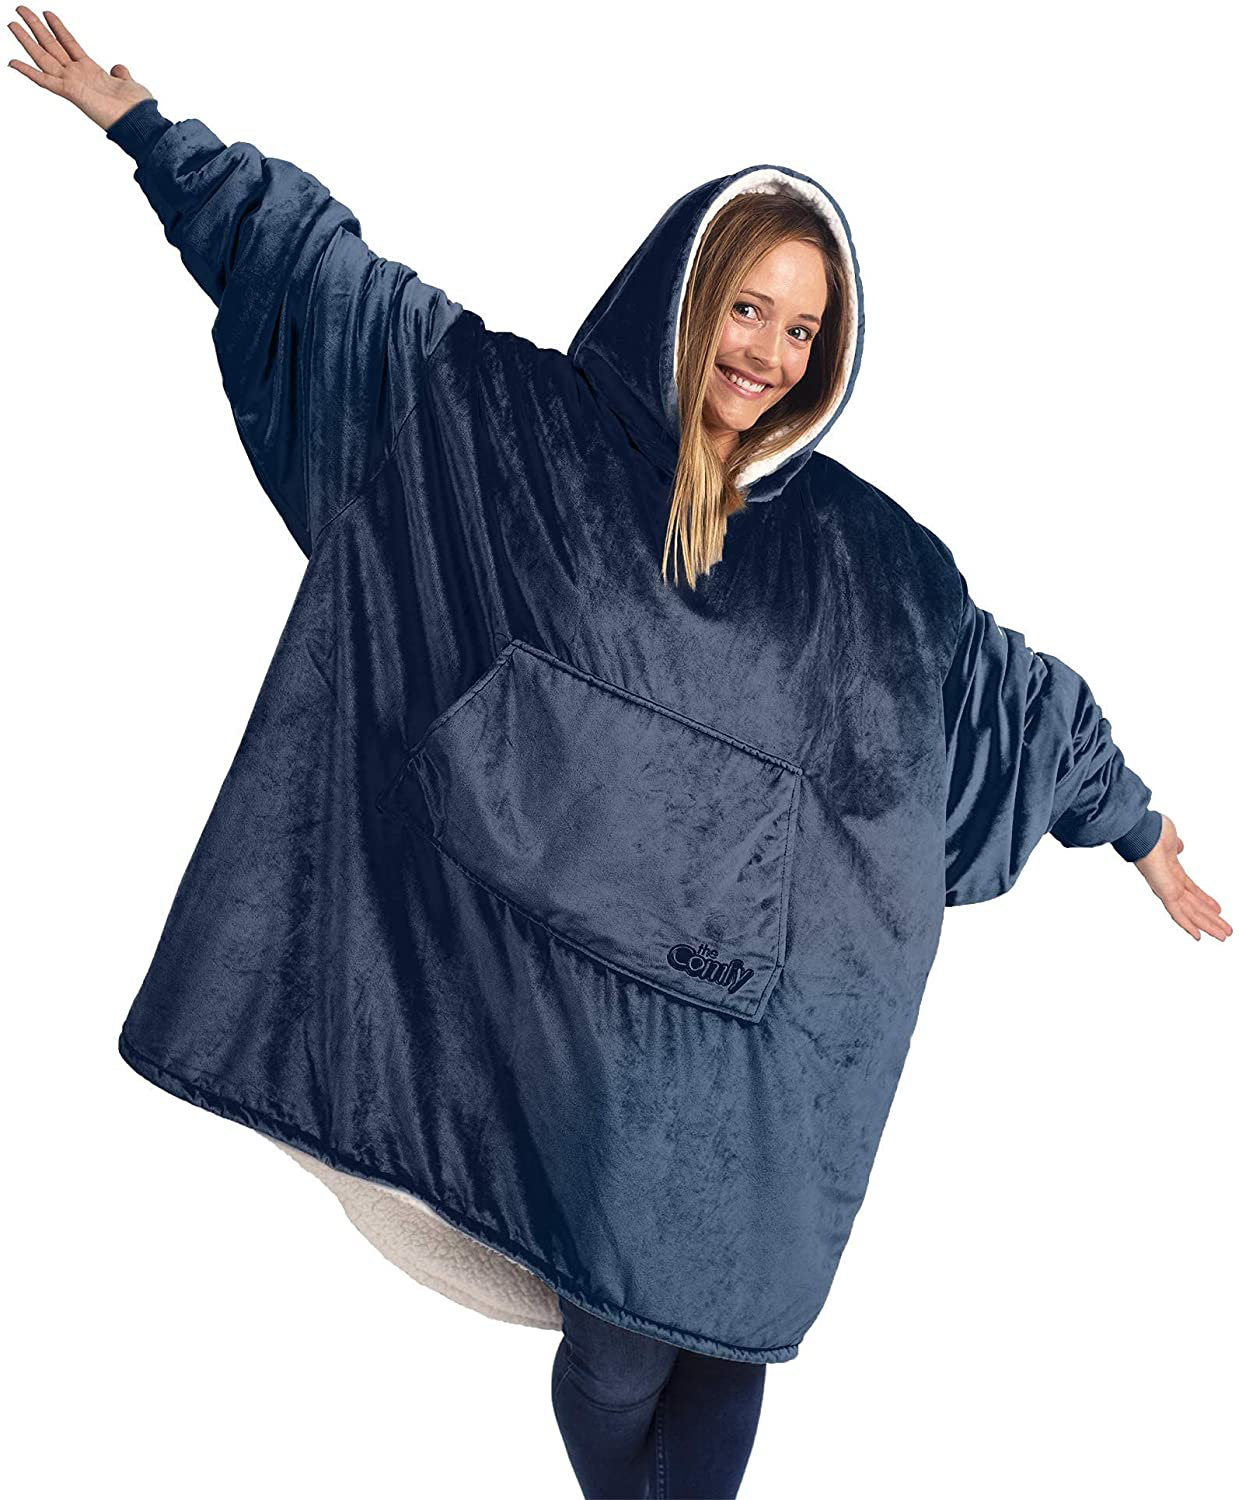 THE COMFY Original| Oversized Microfiber & Sherpa Wearable Blanket, Seen On Shark Tank, One Size Fits All